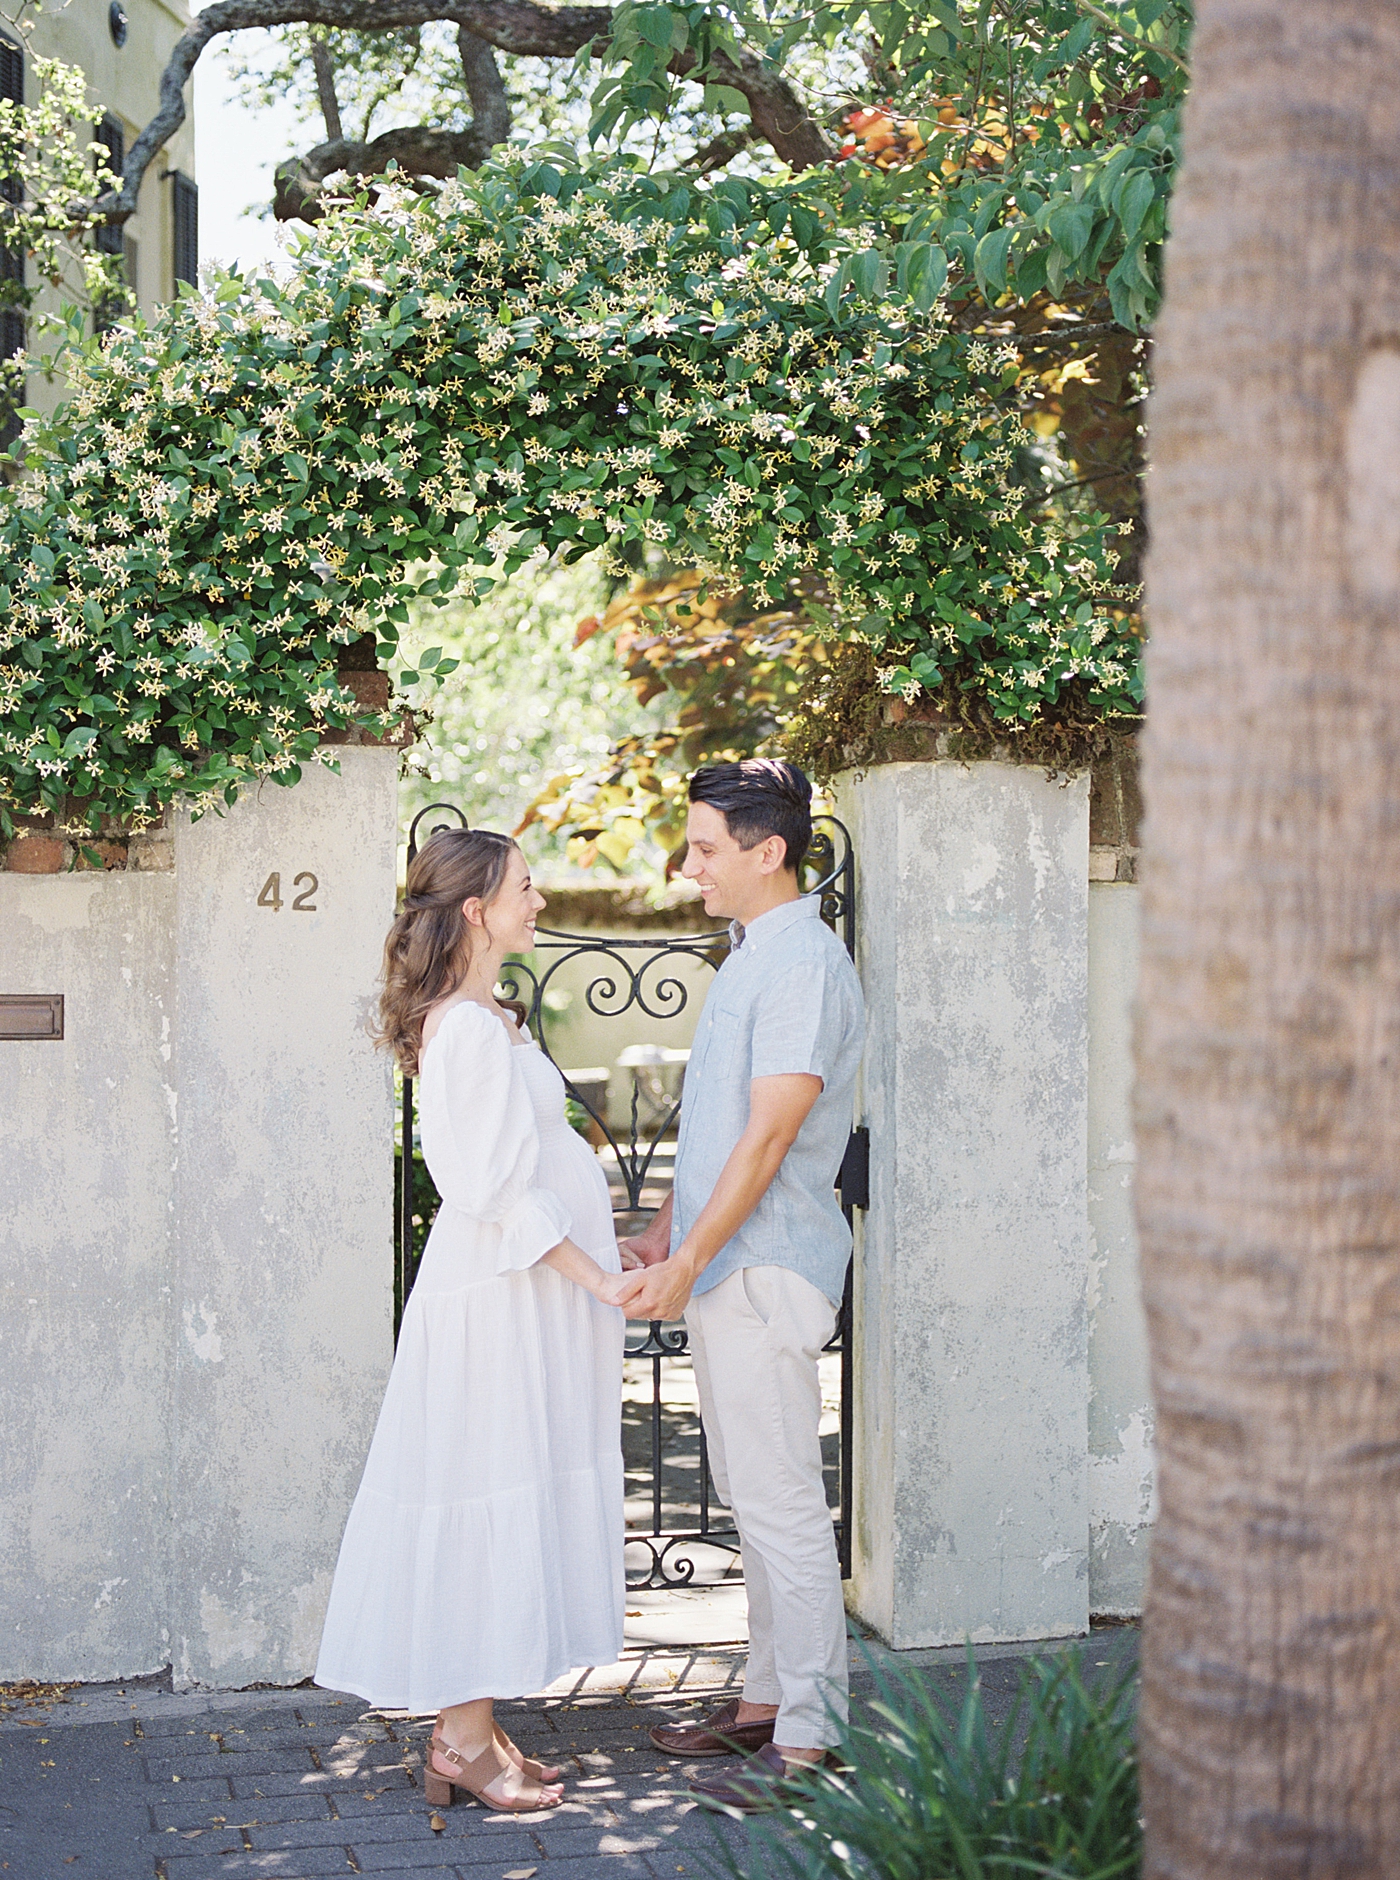 Mom and dad to be holding hands in front of an iron gate | Photo by Charleston Film Photographer Caitlyn Motycka